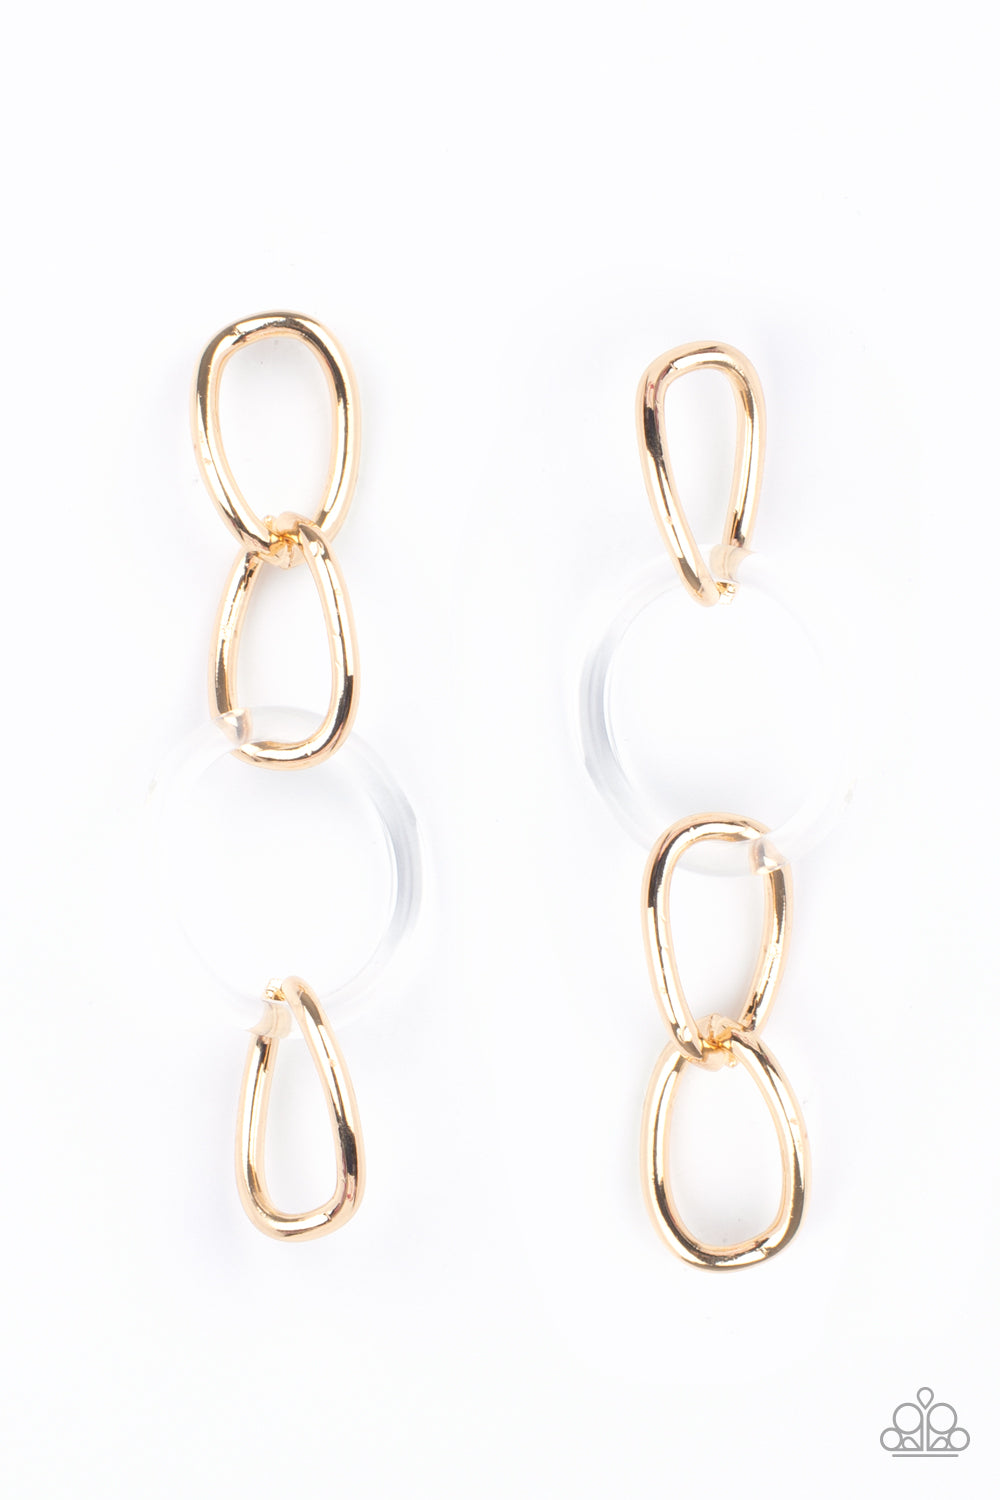 Bright gold oversized links, interrupted by a single large clear acrylic ring, fall from the ear in linked succession for an on-trend fashion statement. Earring attaches to a standard post fitting.